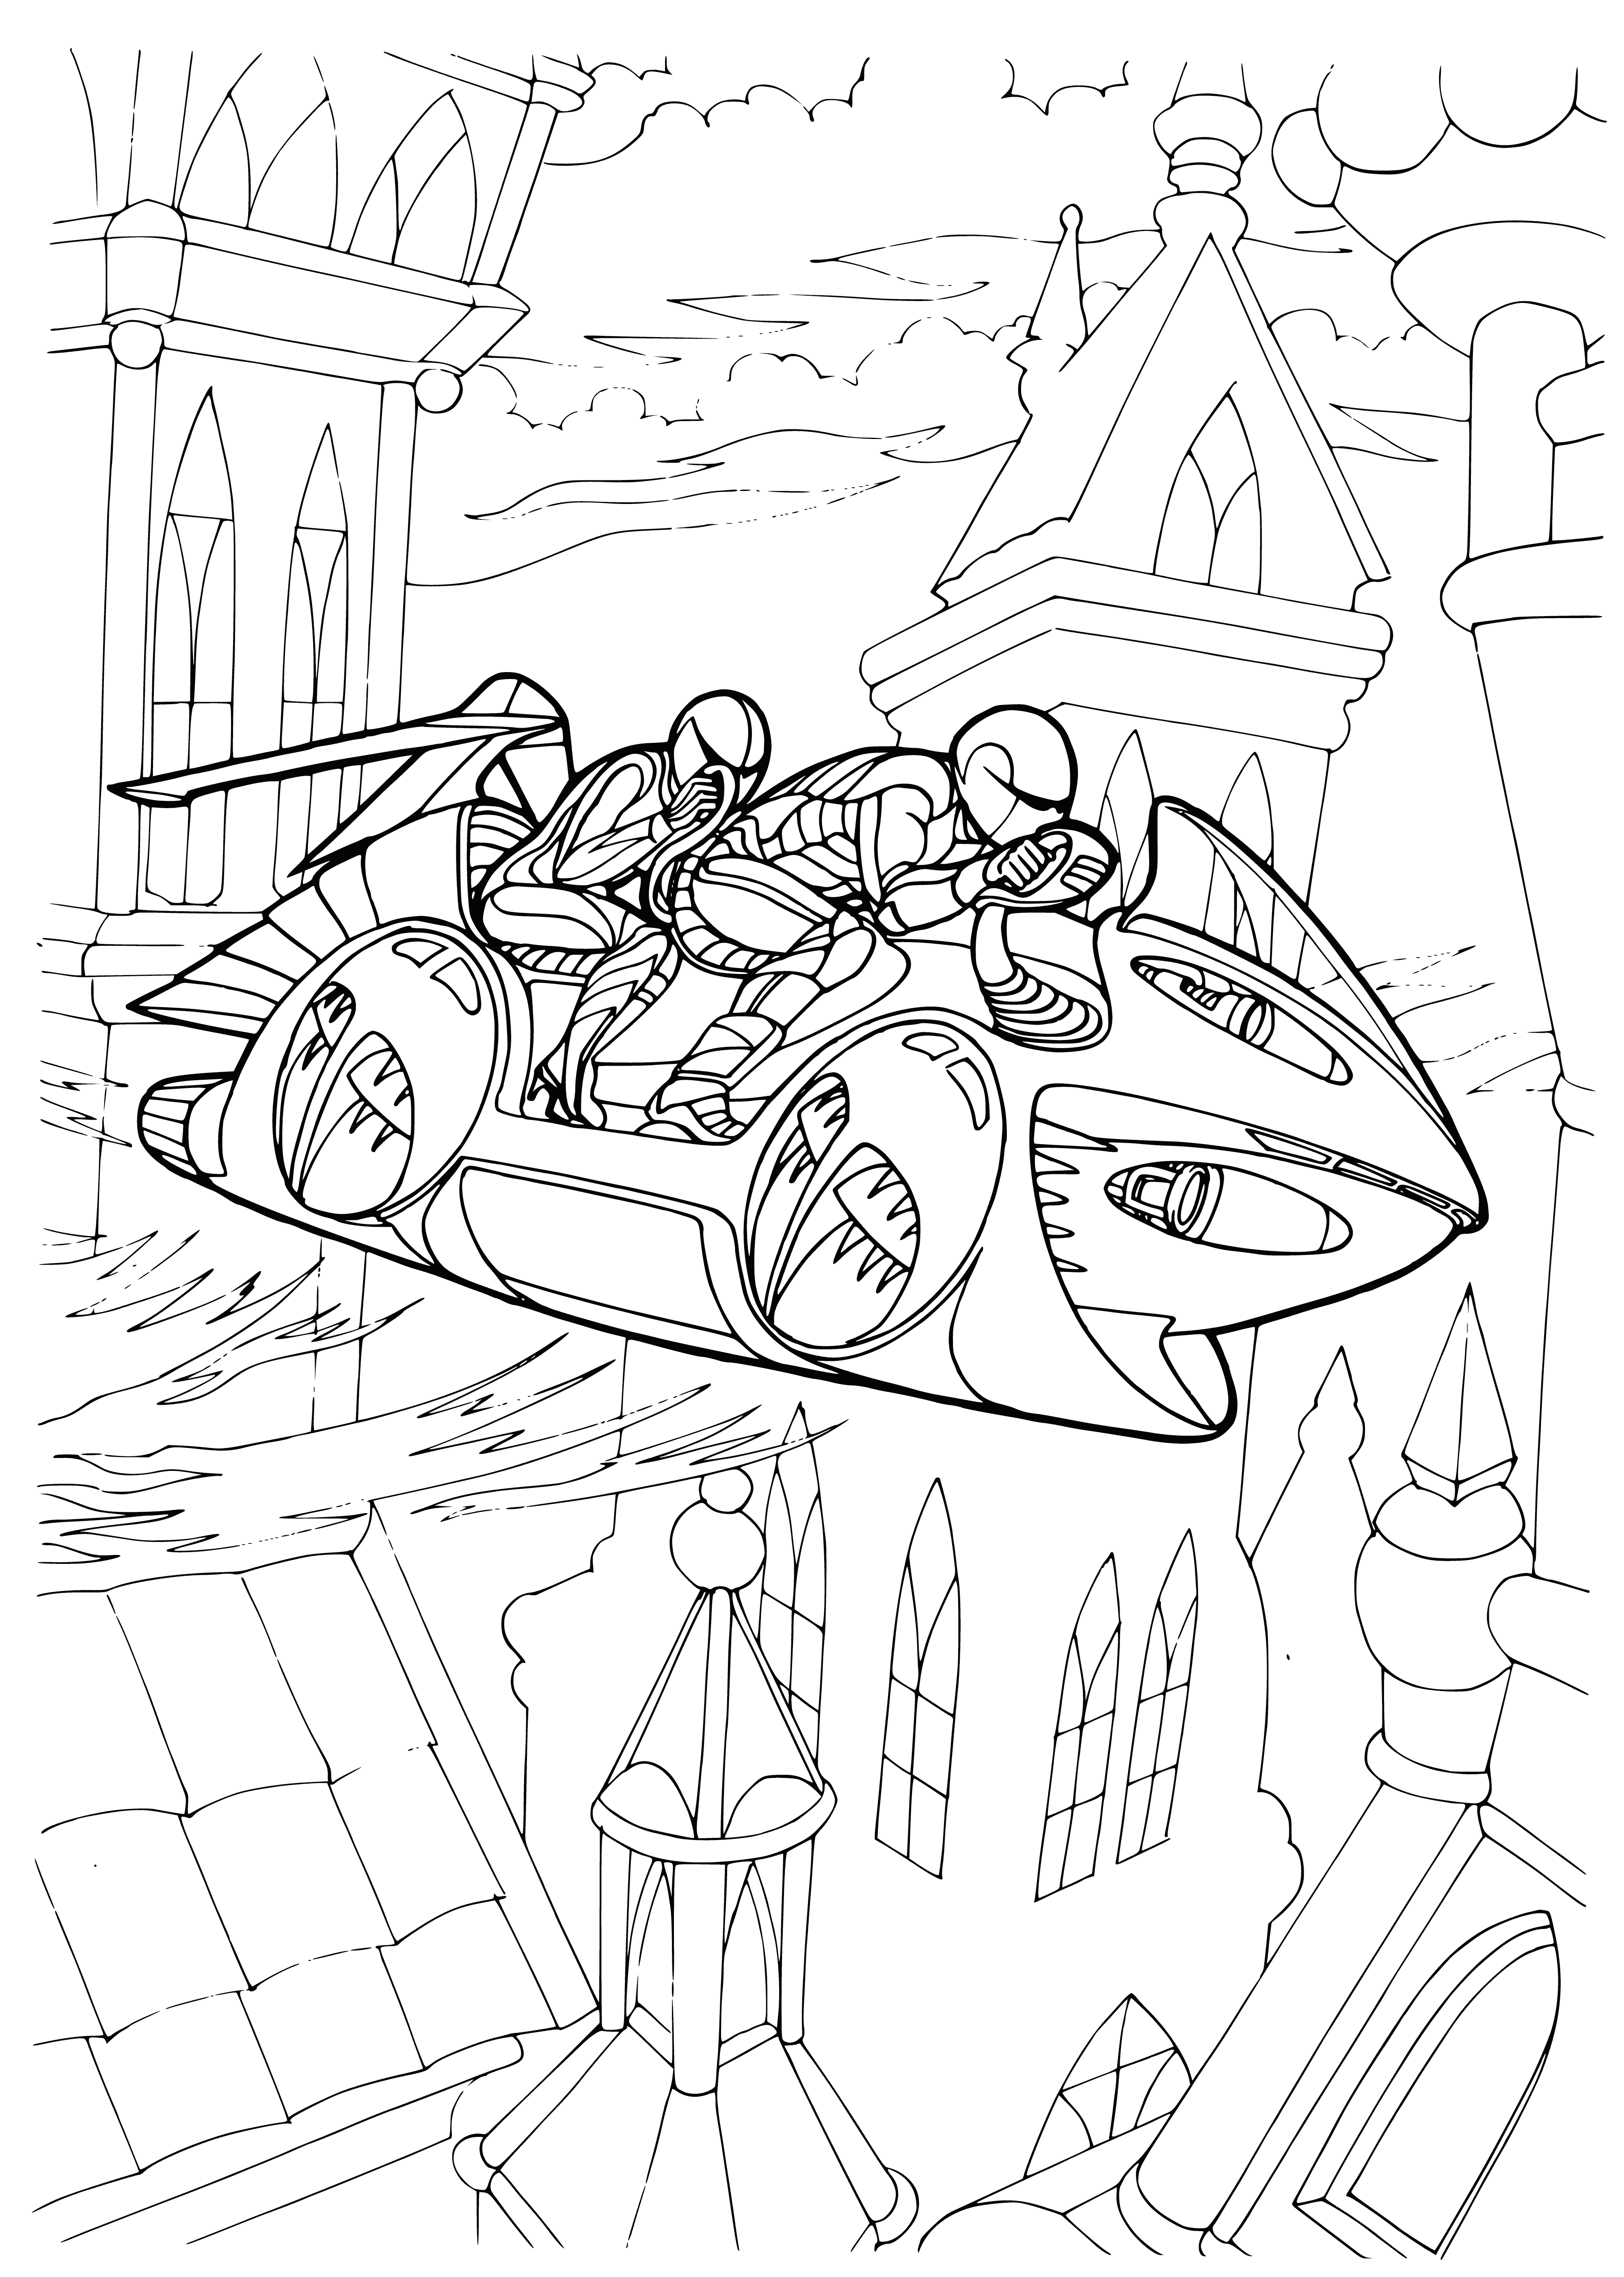 coloring page: A sleek, triangular, floating vehicle cruises down a busy road - no windows or doors visible.